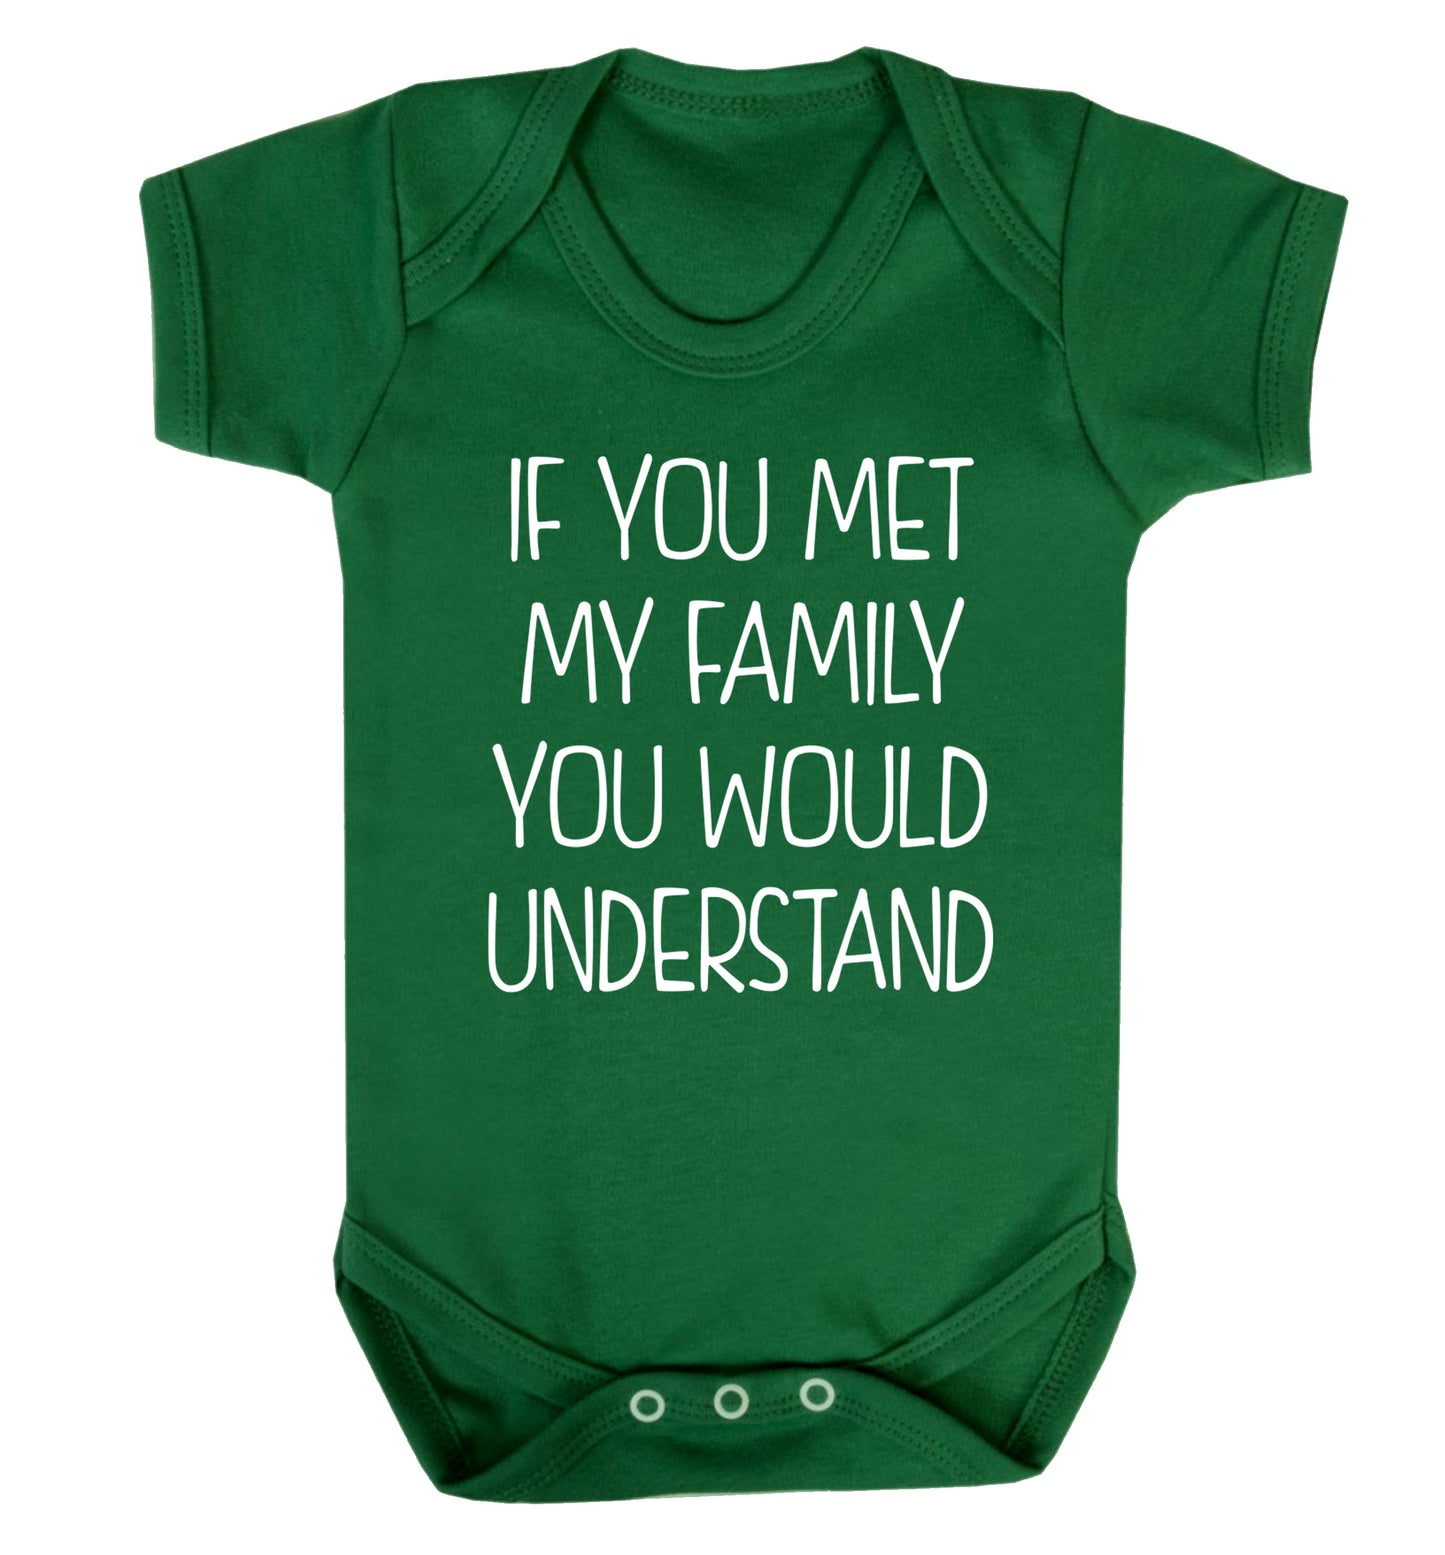 If you met my family you would understand Baby Vest green 18-24 months